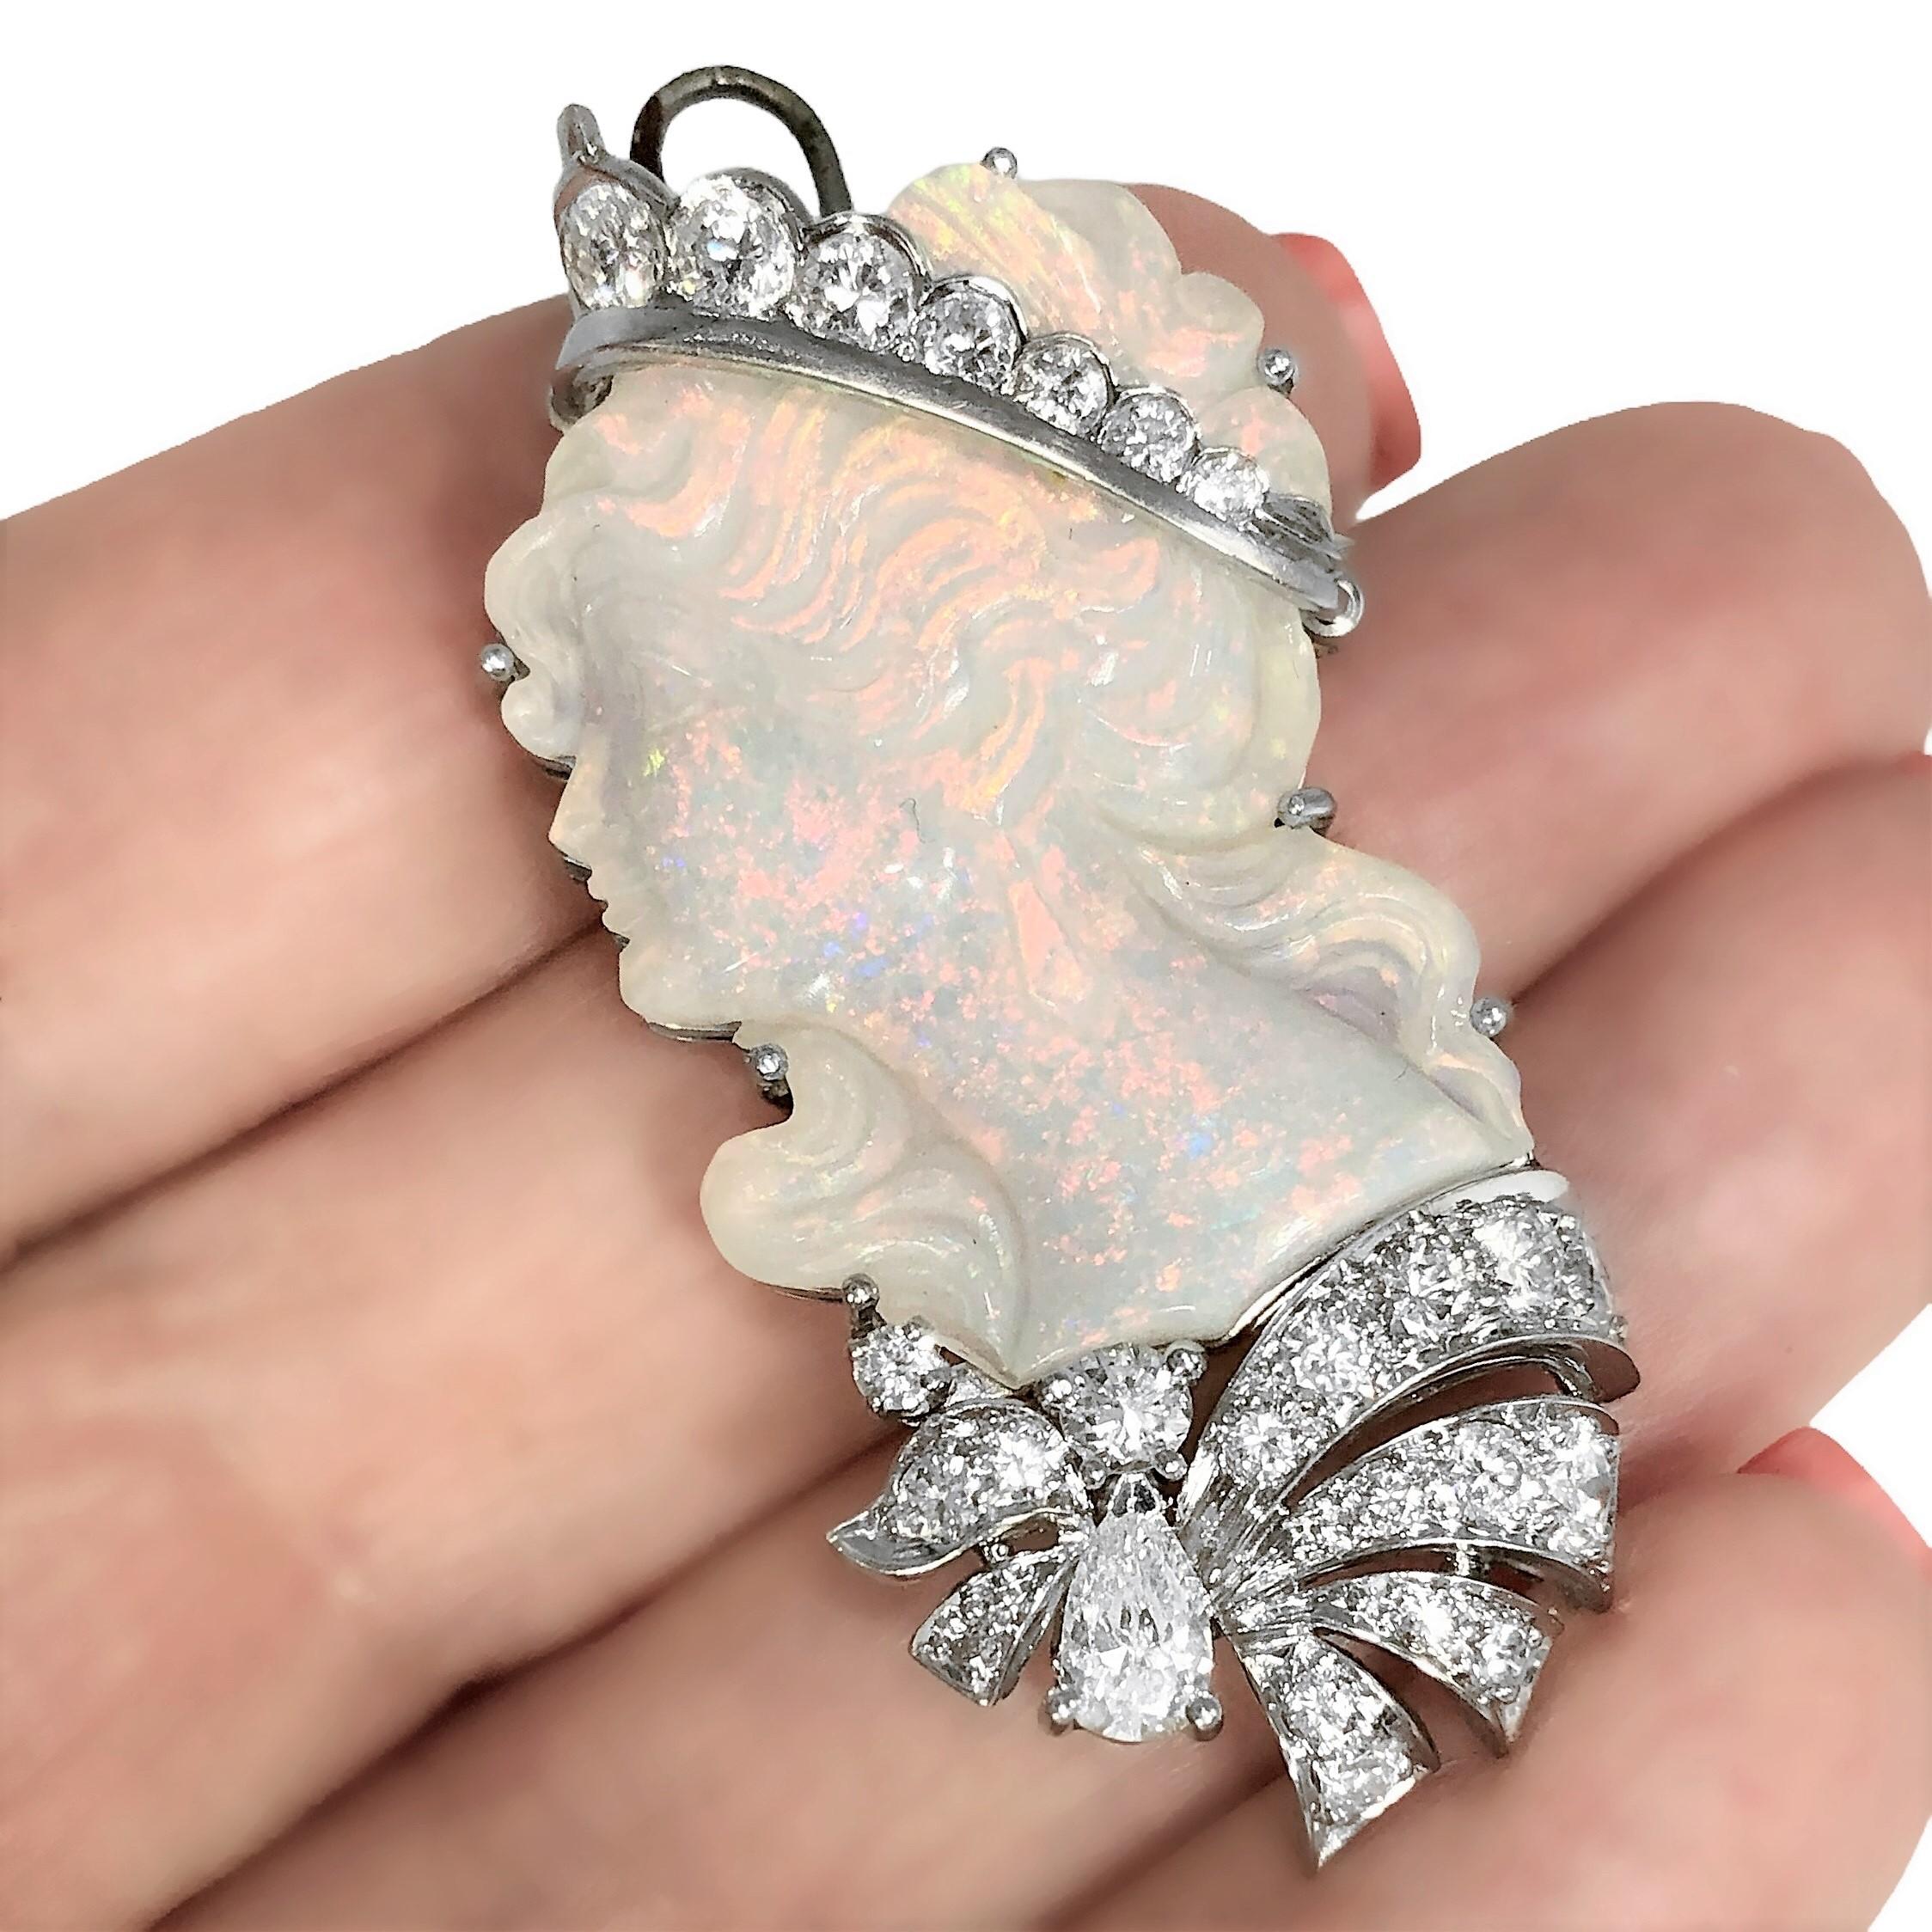 Cabochon Platinum, White Opal, Carved Lady in Silhouette Pendant / Brooch with Diamonds